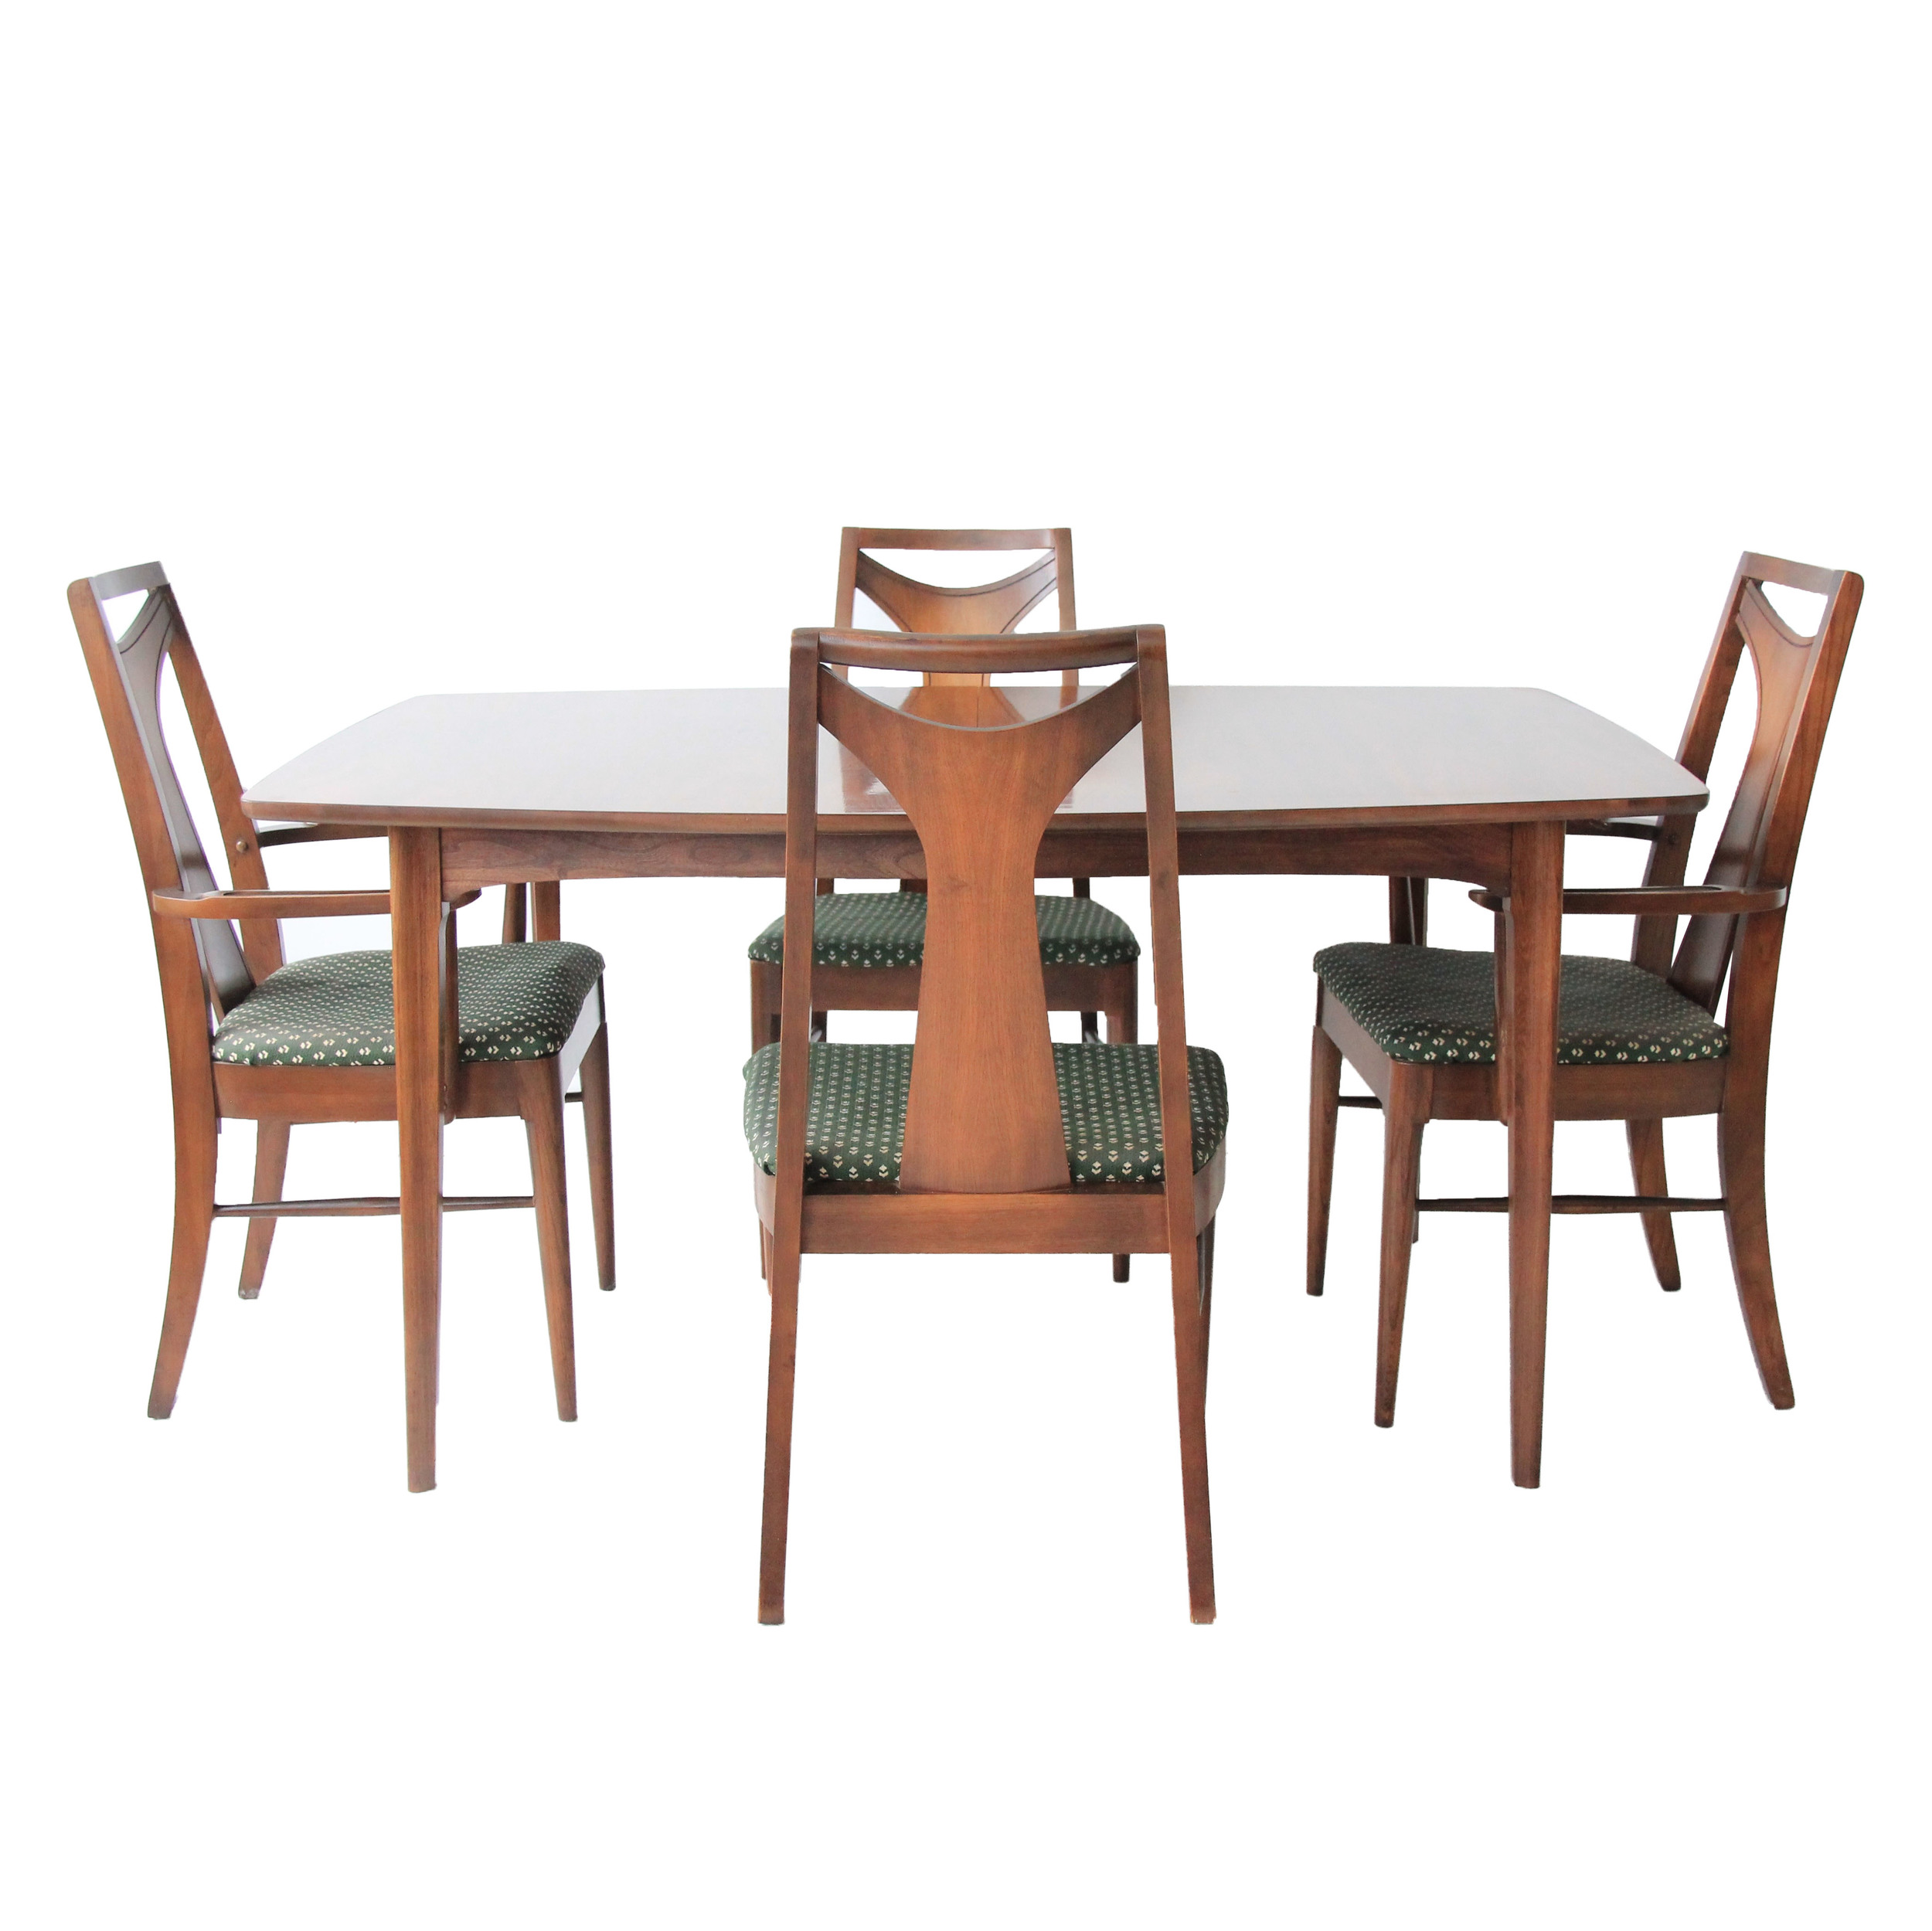 vintage mid century modern dining room table and chairs.jpg